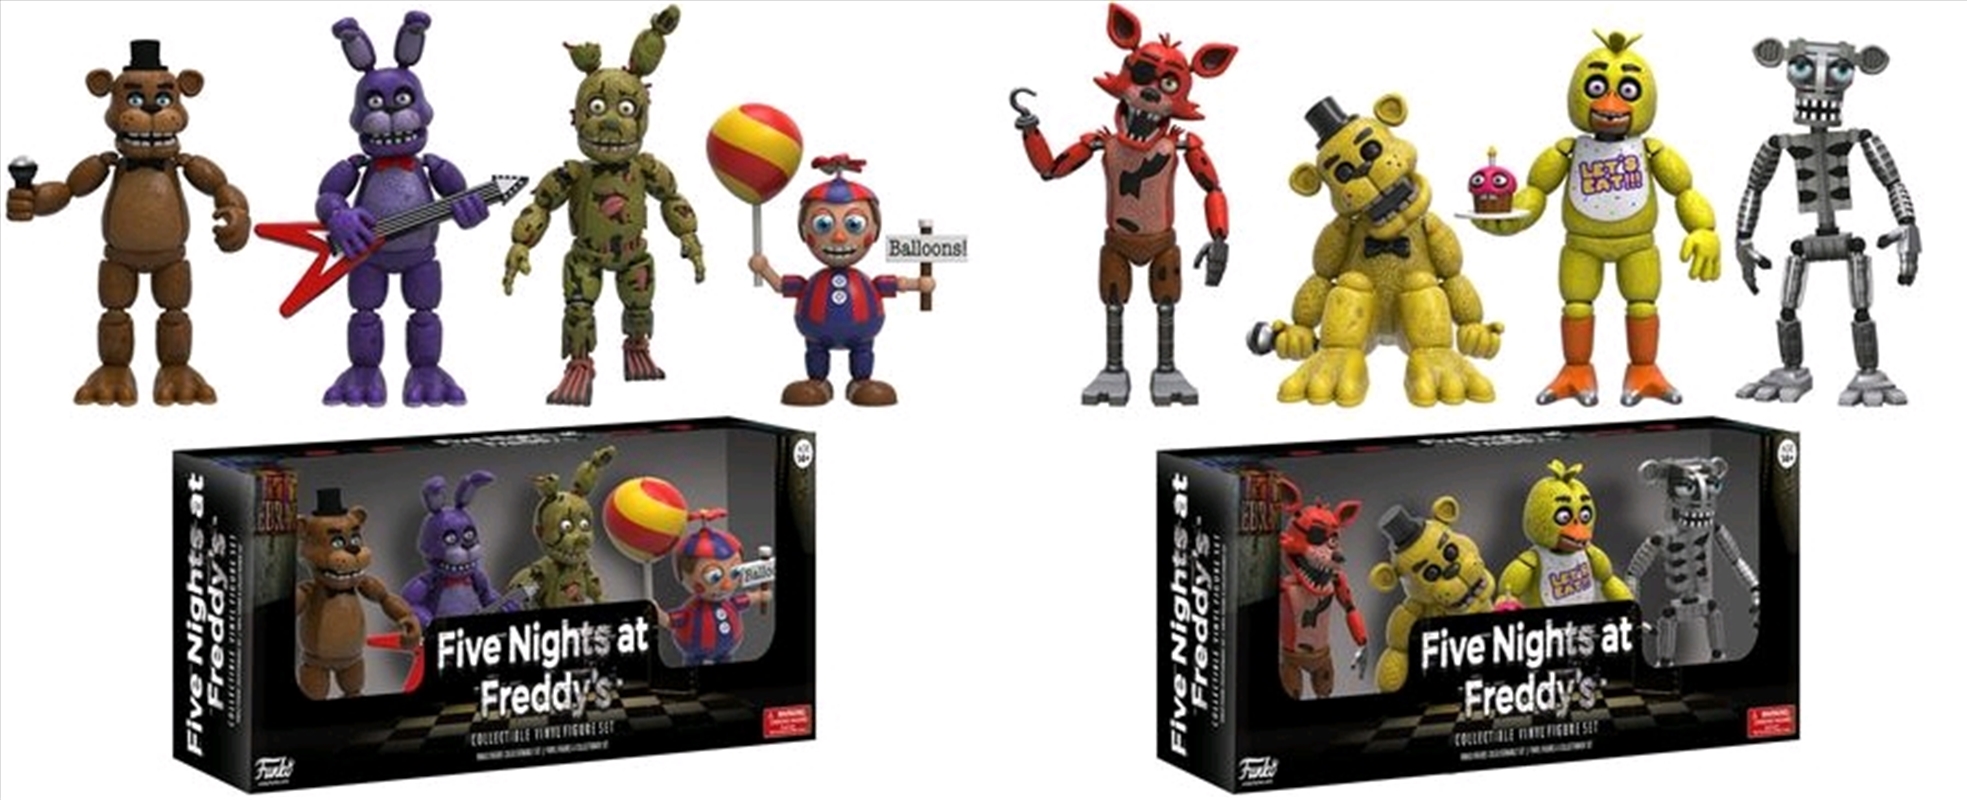 Five Nights at Freddy's - 2" Vinyl Figure 4-Pack Assortment	/Product Detail/Figurines